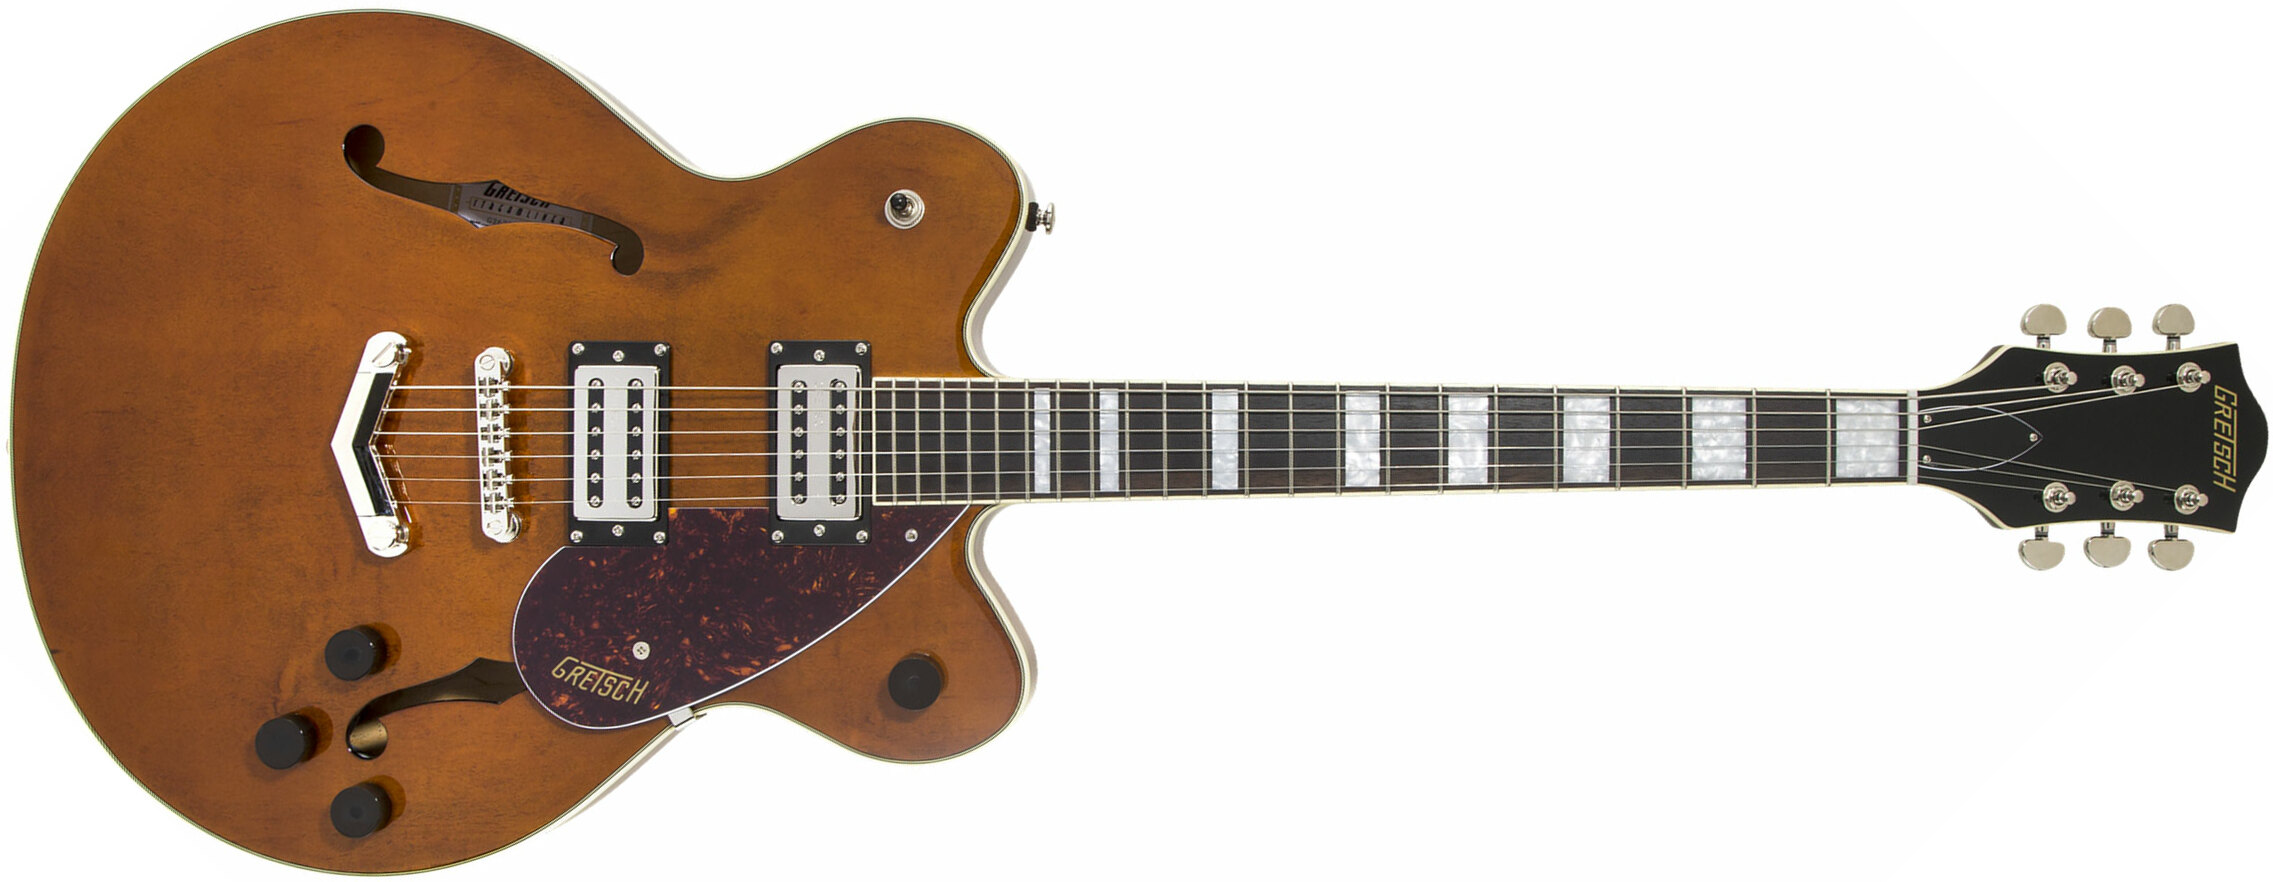 Gretsch G2622 Streamliner Center Block V-stoptail Hh Ht Lau - Single Barrel Stain - Semi-hollow electric guitar - Main picture